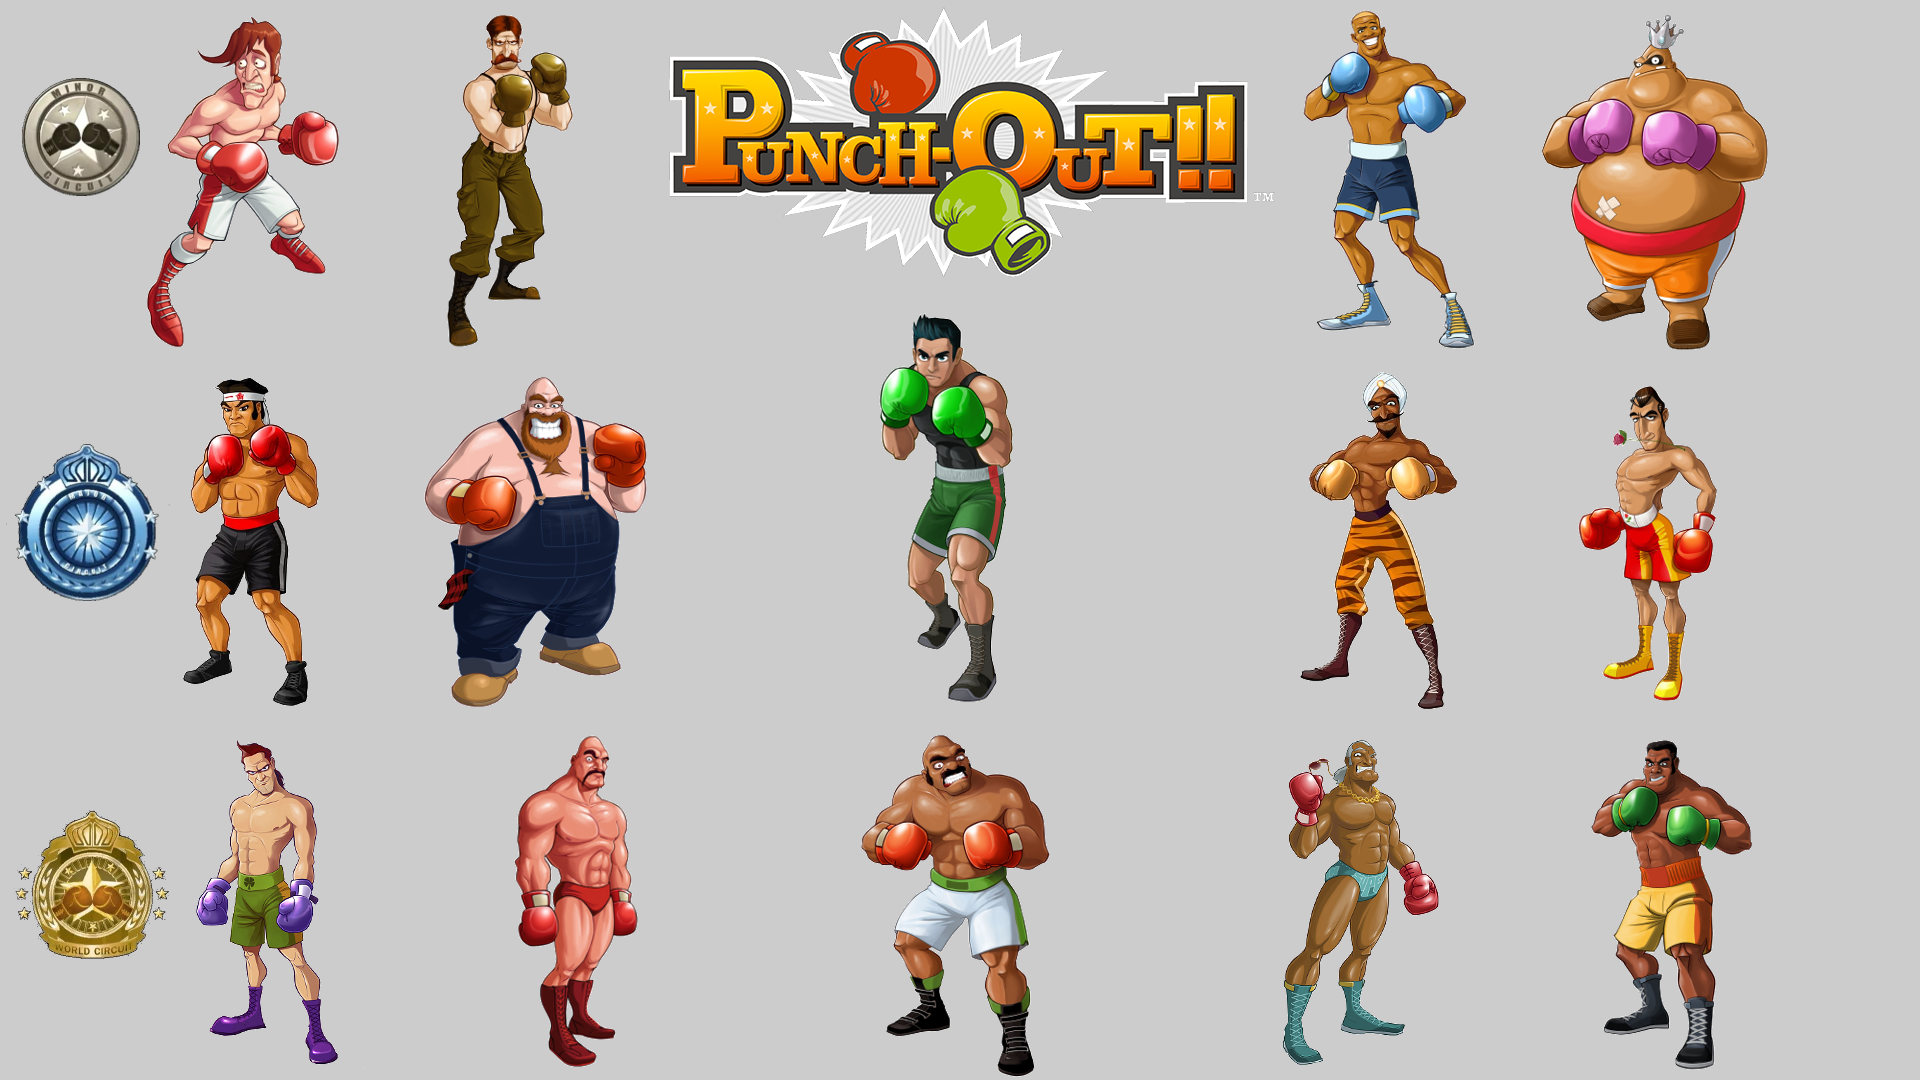 Video Game Punch-Out!! (Wii) HD Wallpaper | Background Image